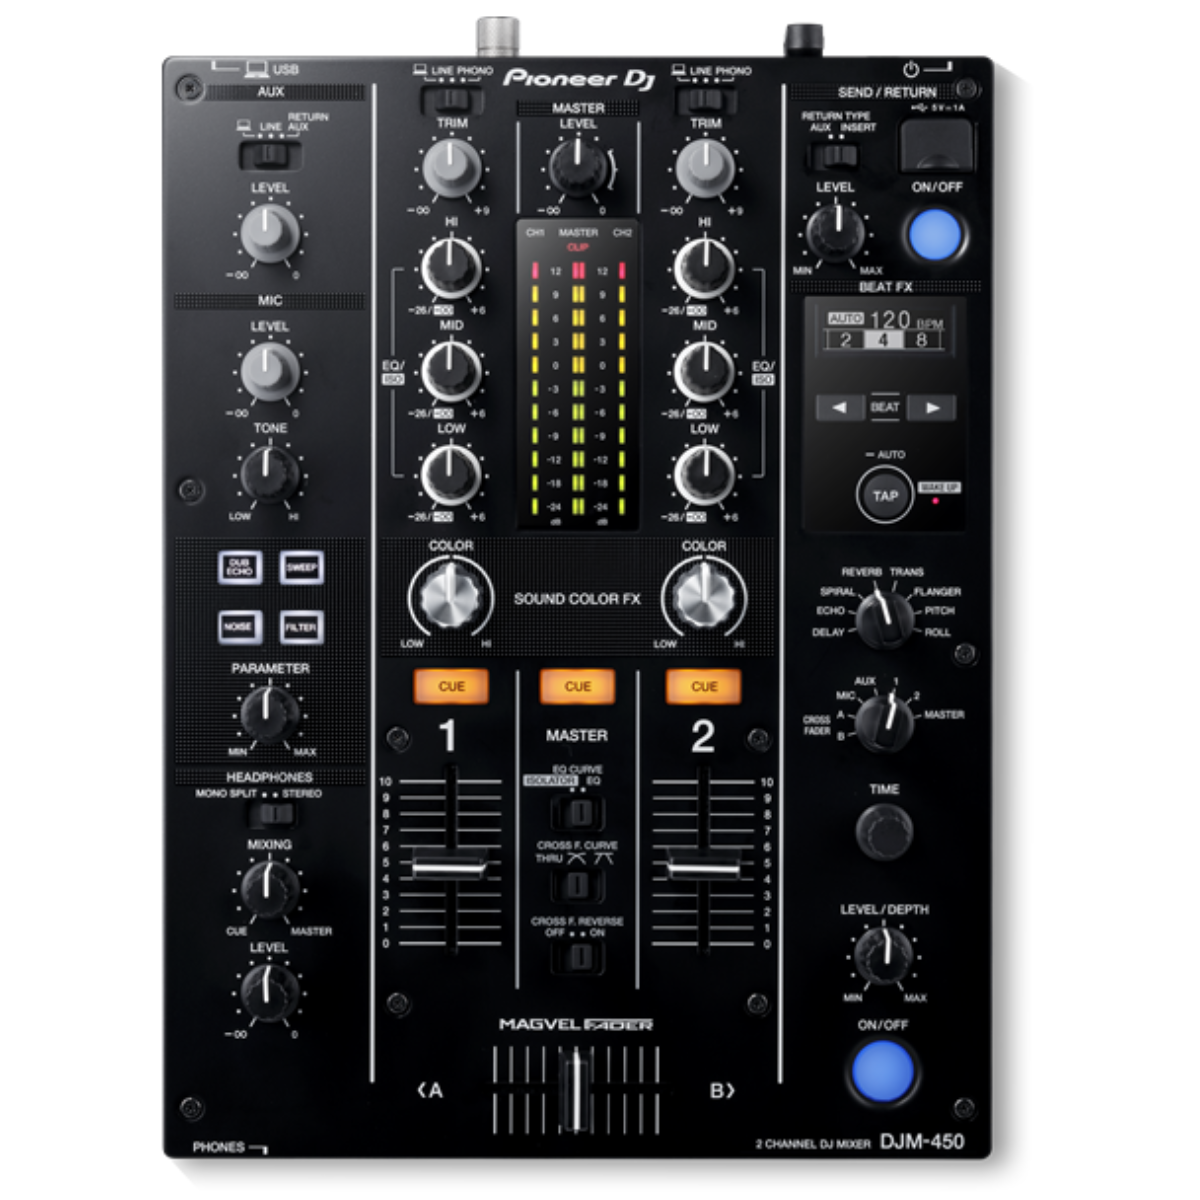 Pioneer DJM-450 (Hong Kong licensed) DJ mixer 2 channels equipped with Beat FX 